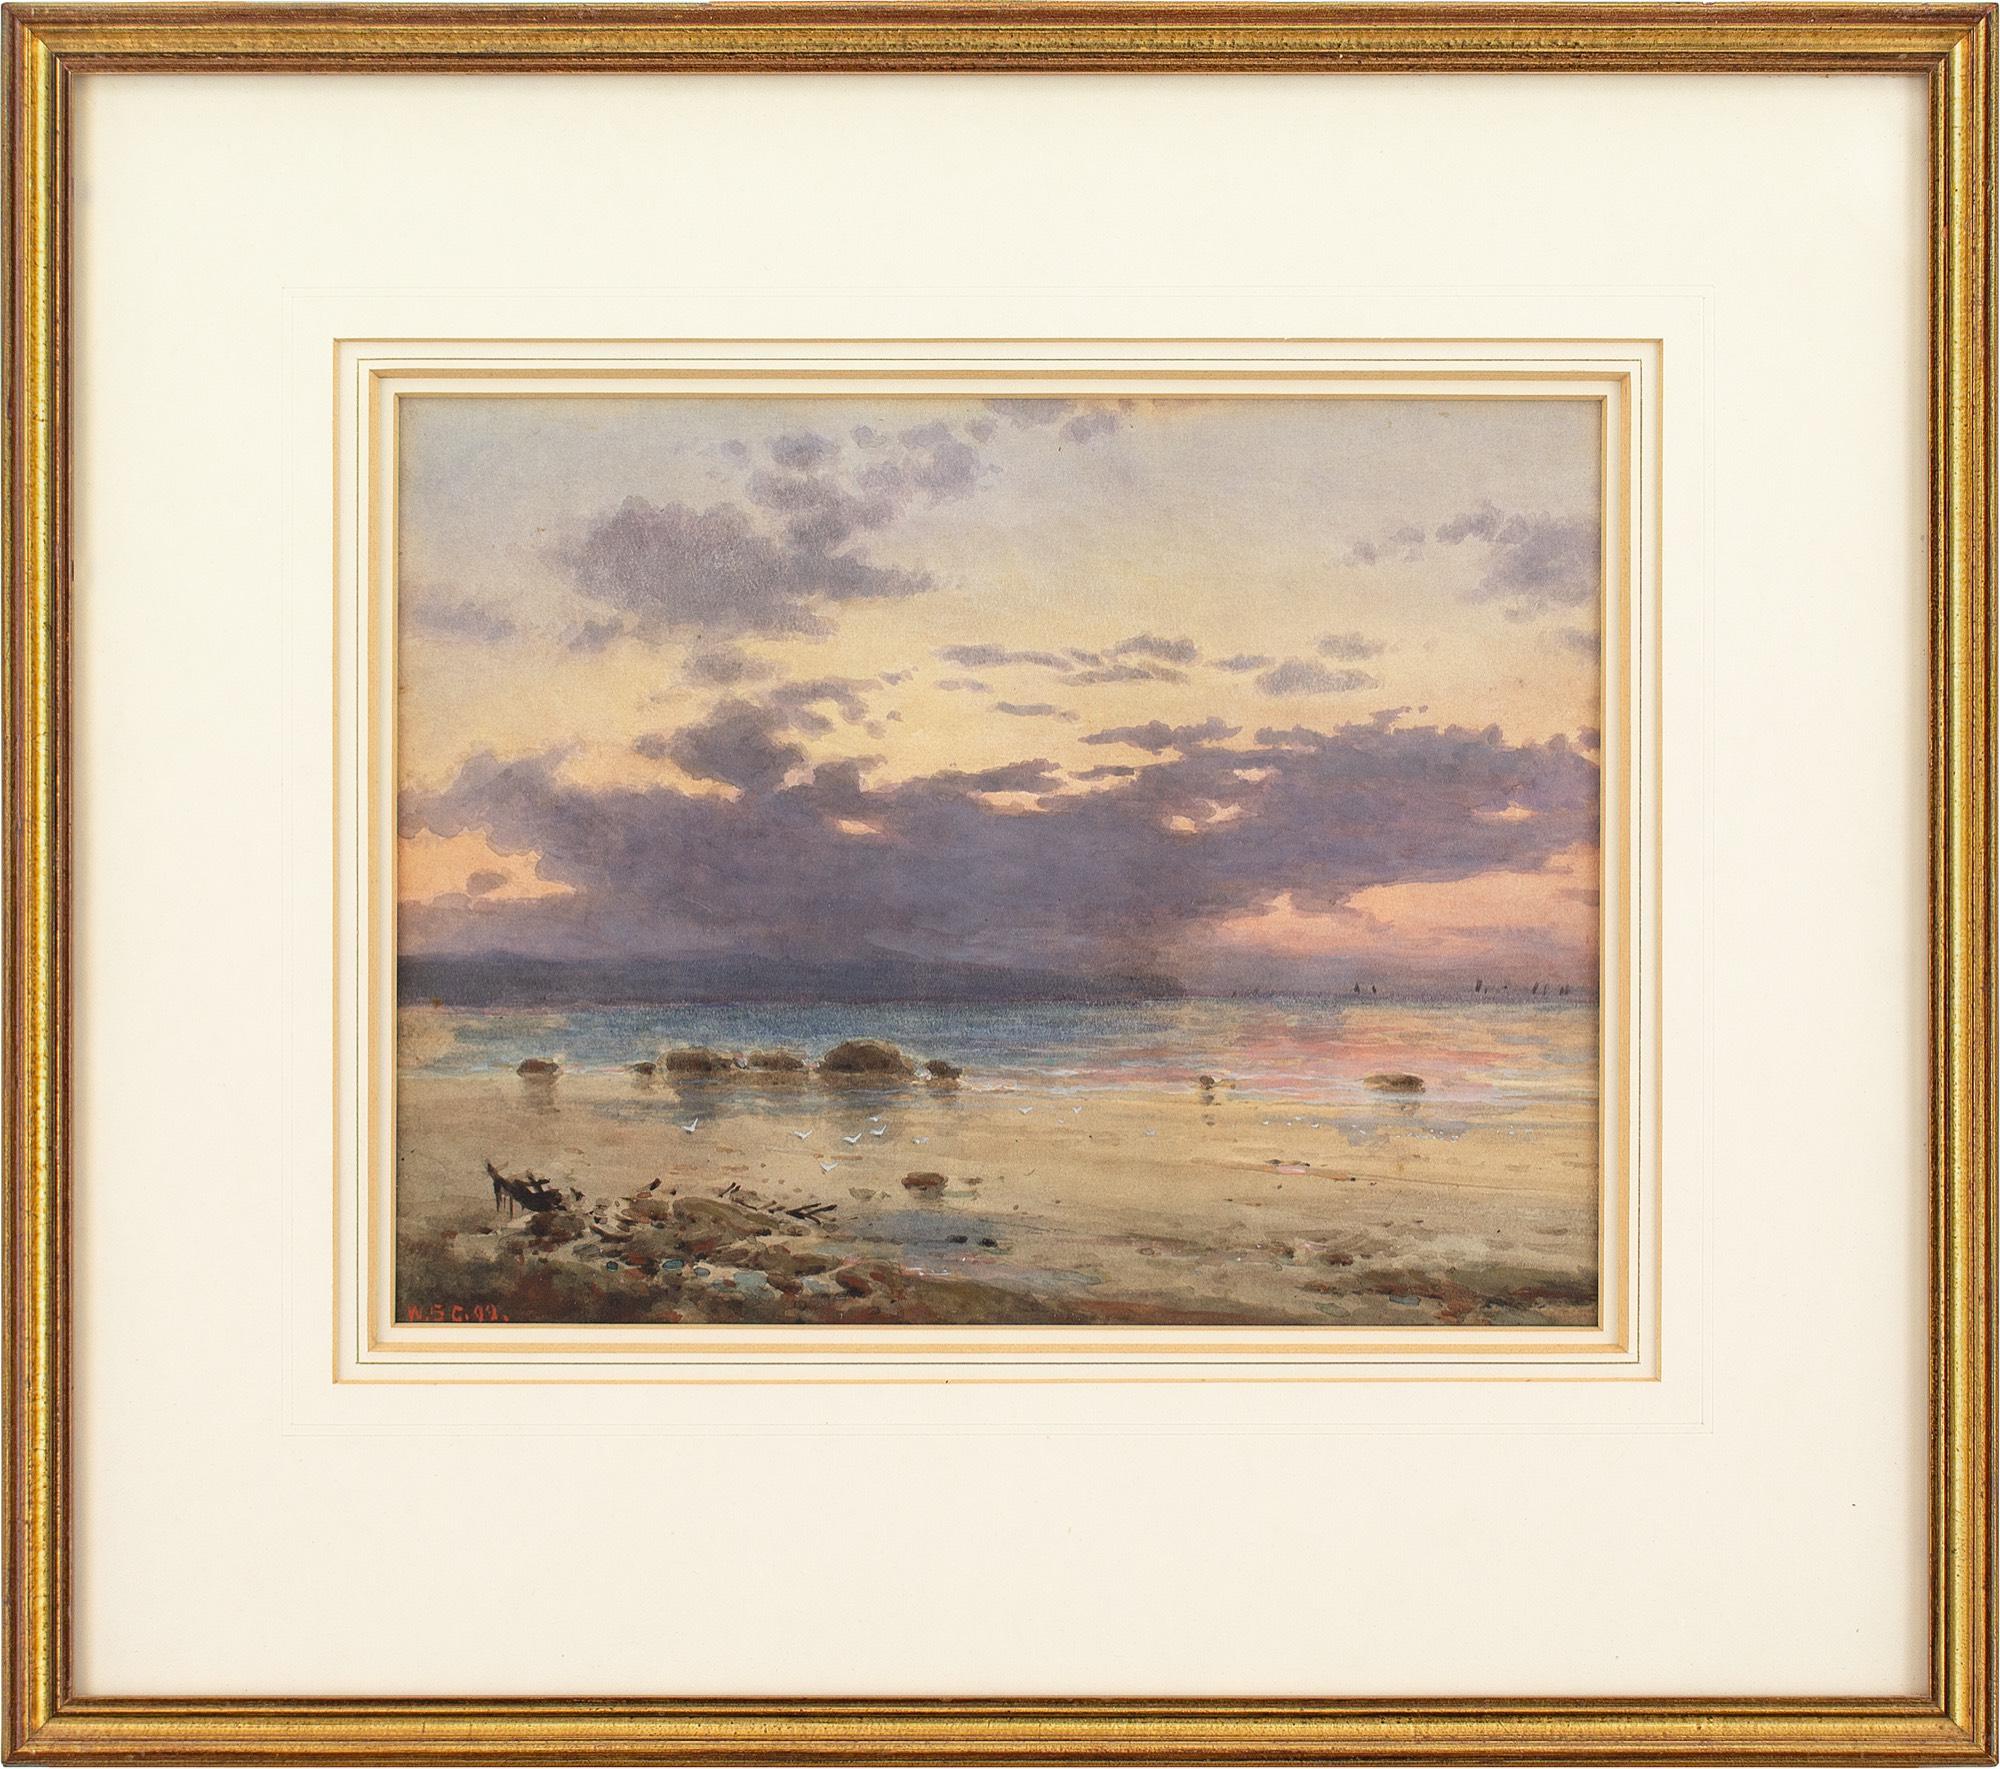 This late 19th-century watercolour by British artist William Stephen Coleman (1829-1904) depicts an atmospheric coastal view with sunset.

As the sun slips surreptitiously beyond the horizon, hidden by a dark backlit cloud, pinkish tints shimmer